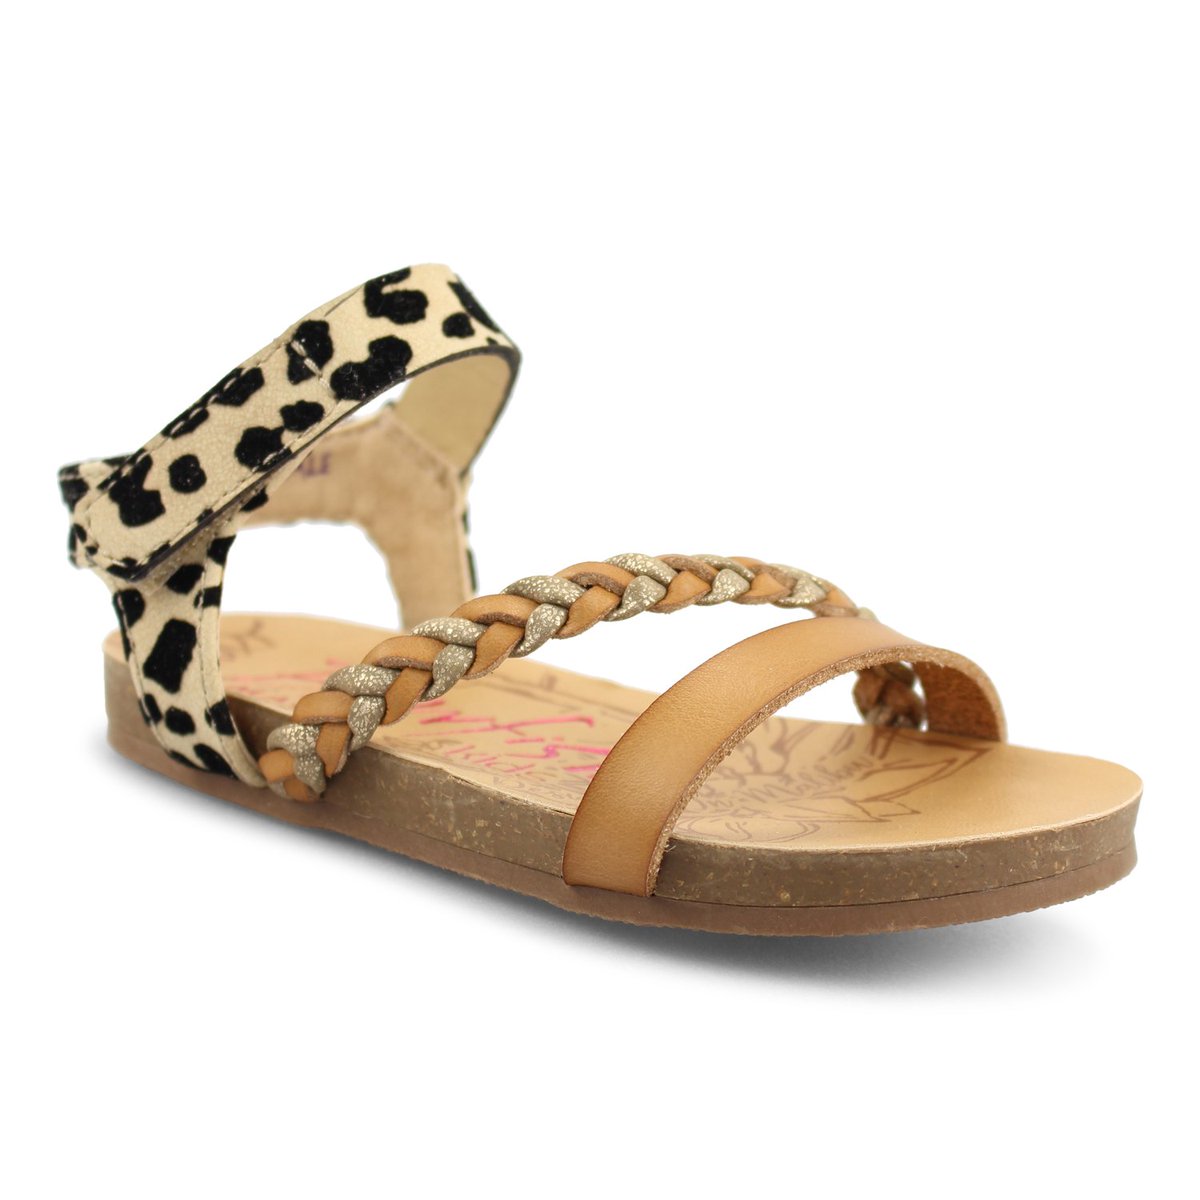 Goya Product Description
Goya features our signature lightly padded, cork inspired footbed and Velcro closure. You can pair these with her favorite casual warm-weather looks! #girls #blowfish #kids #metasizechartyouthsizechart https://t.co/iFen2M6YQa